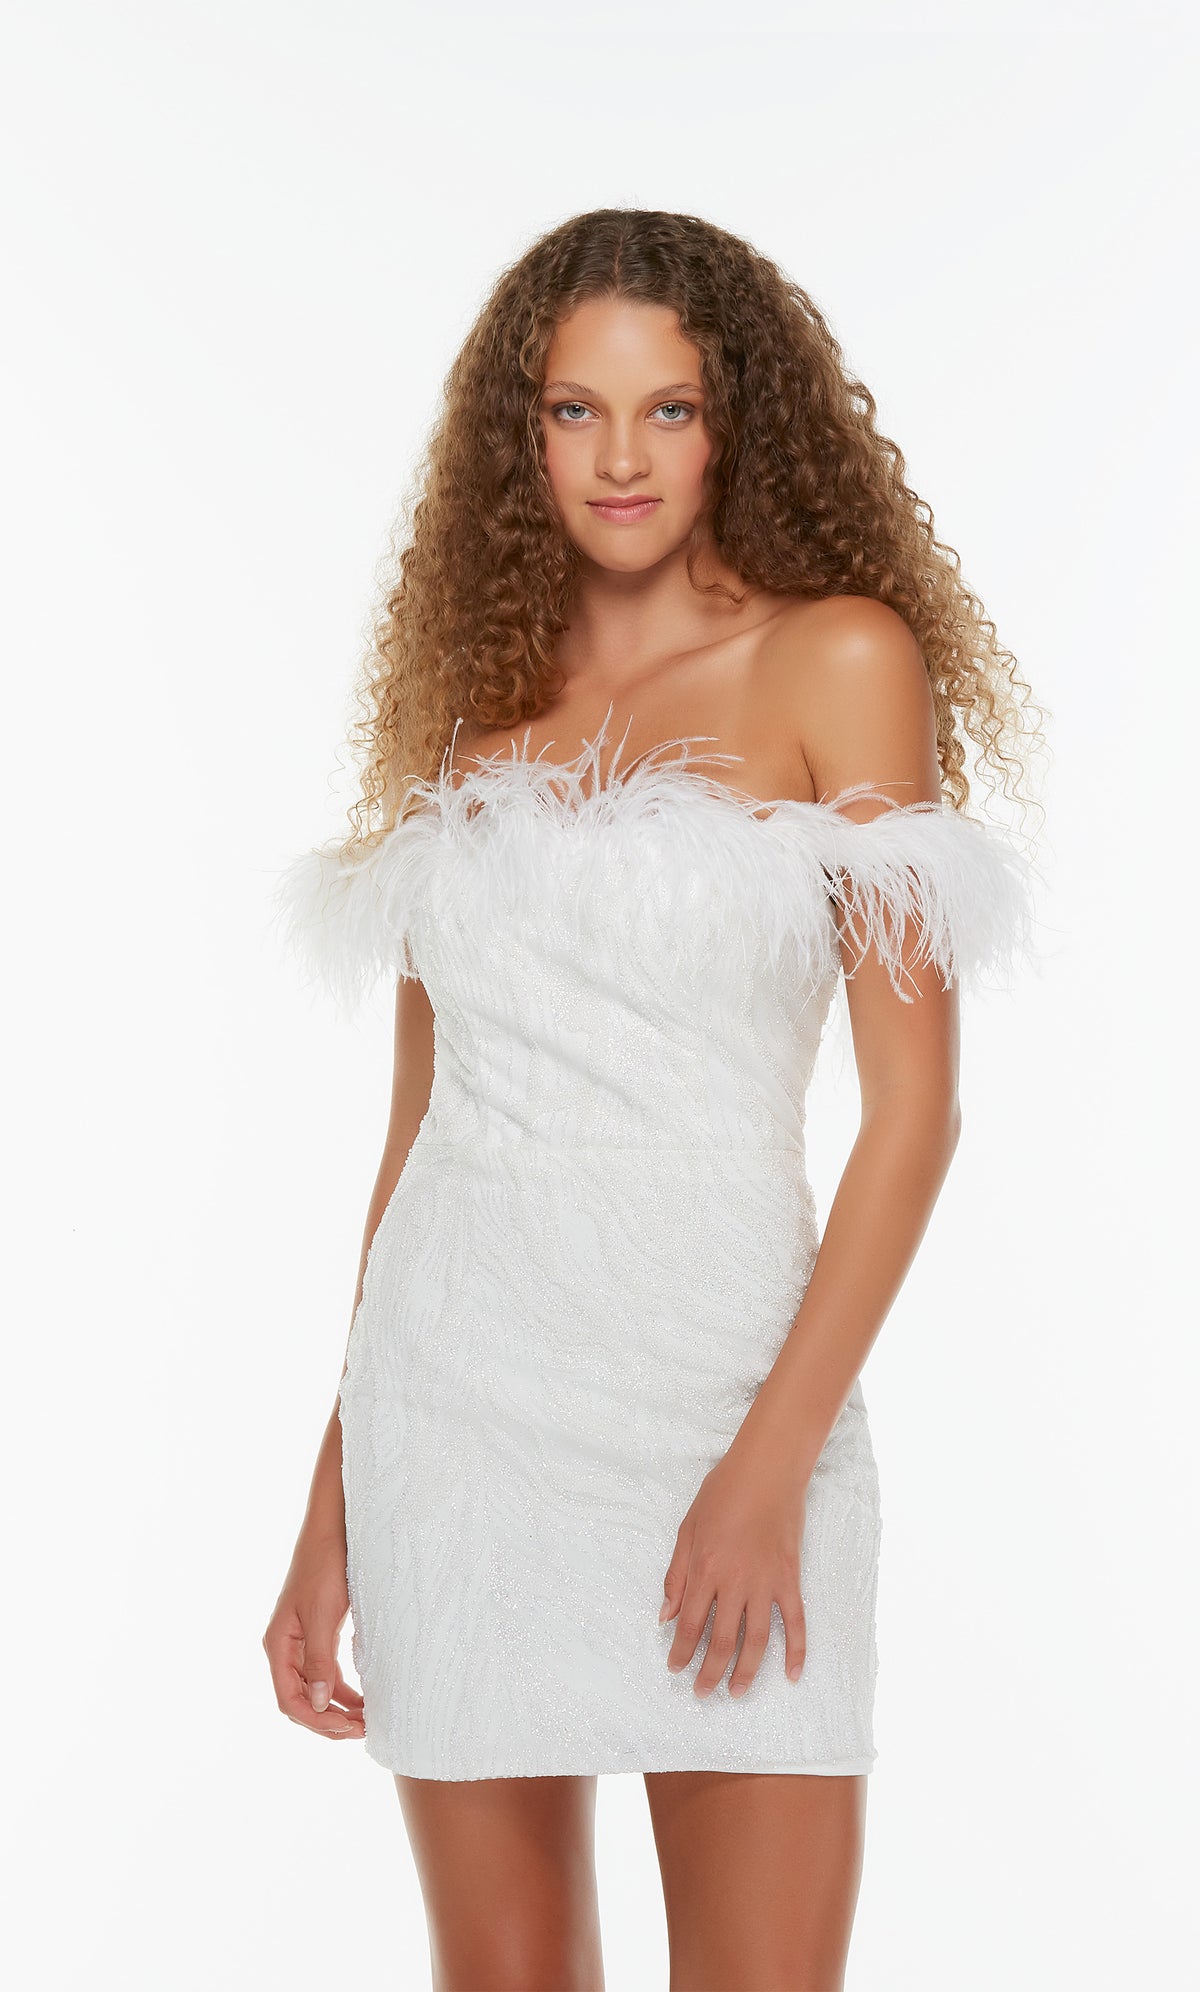 Short white off the shoulder dress with feather trim.